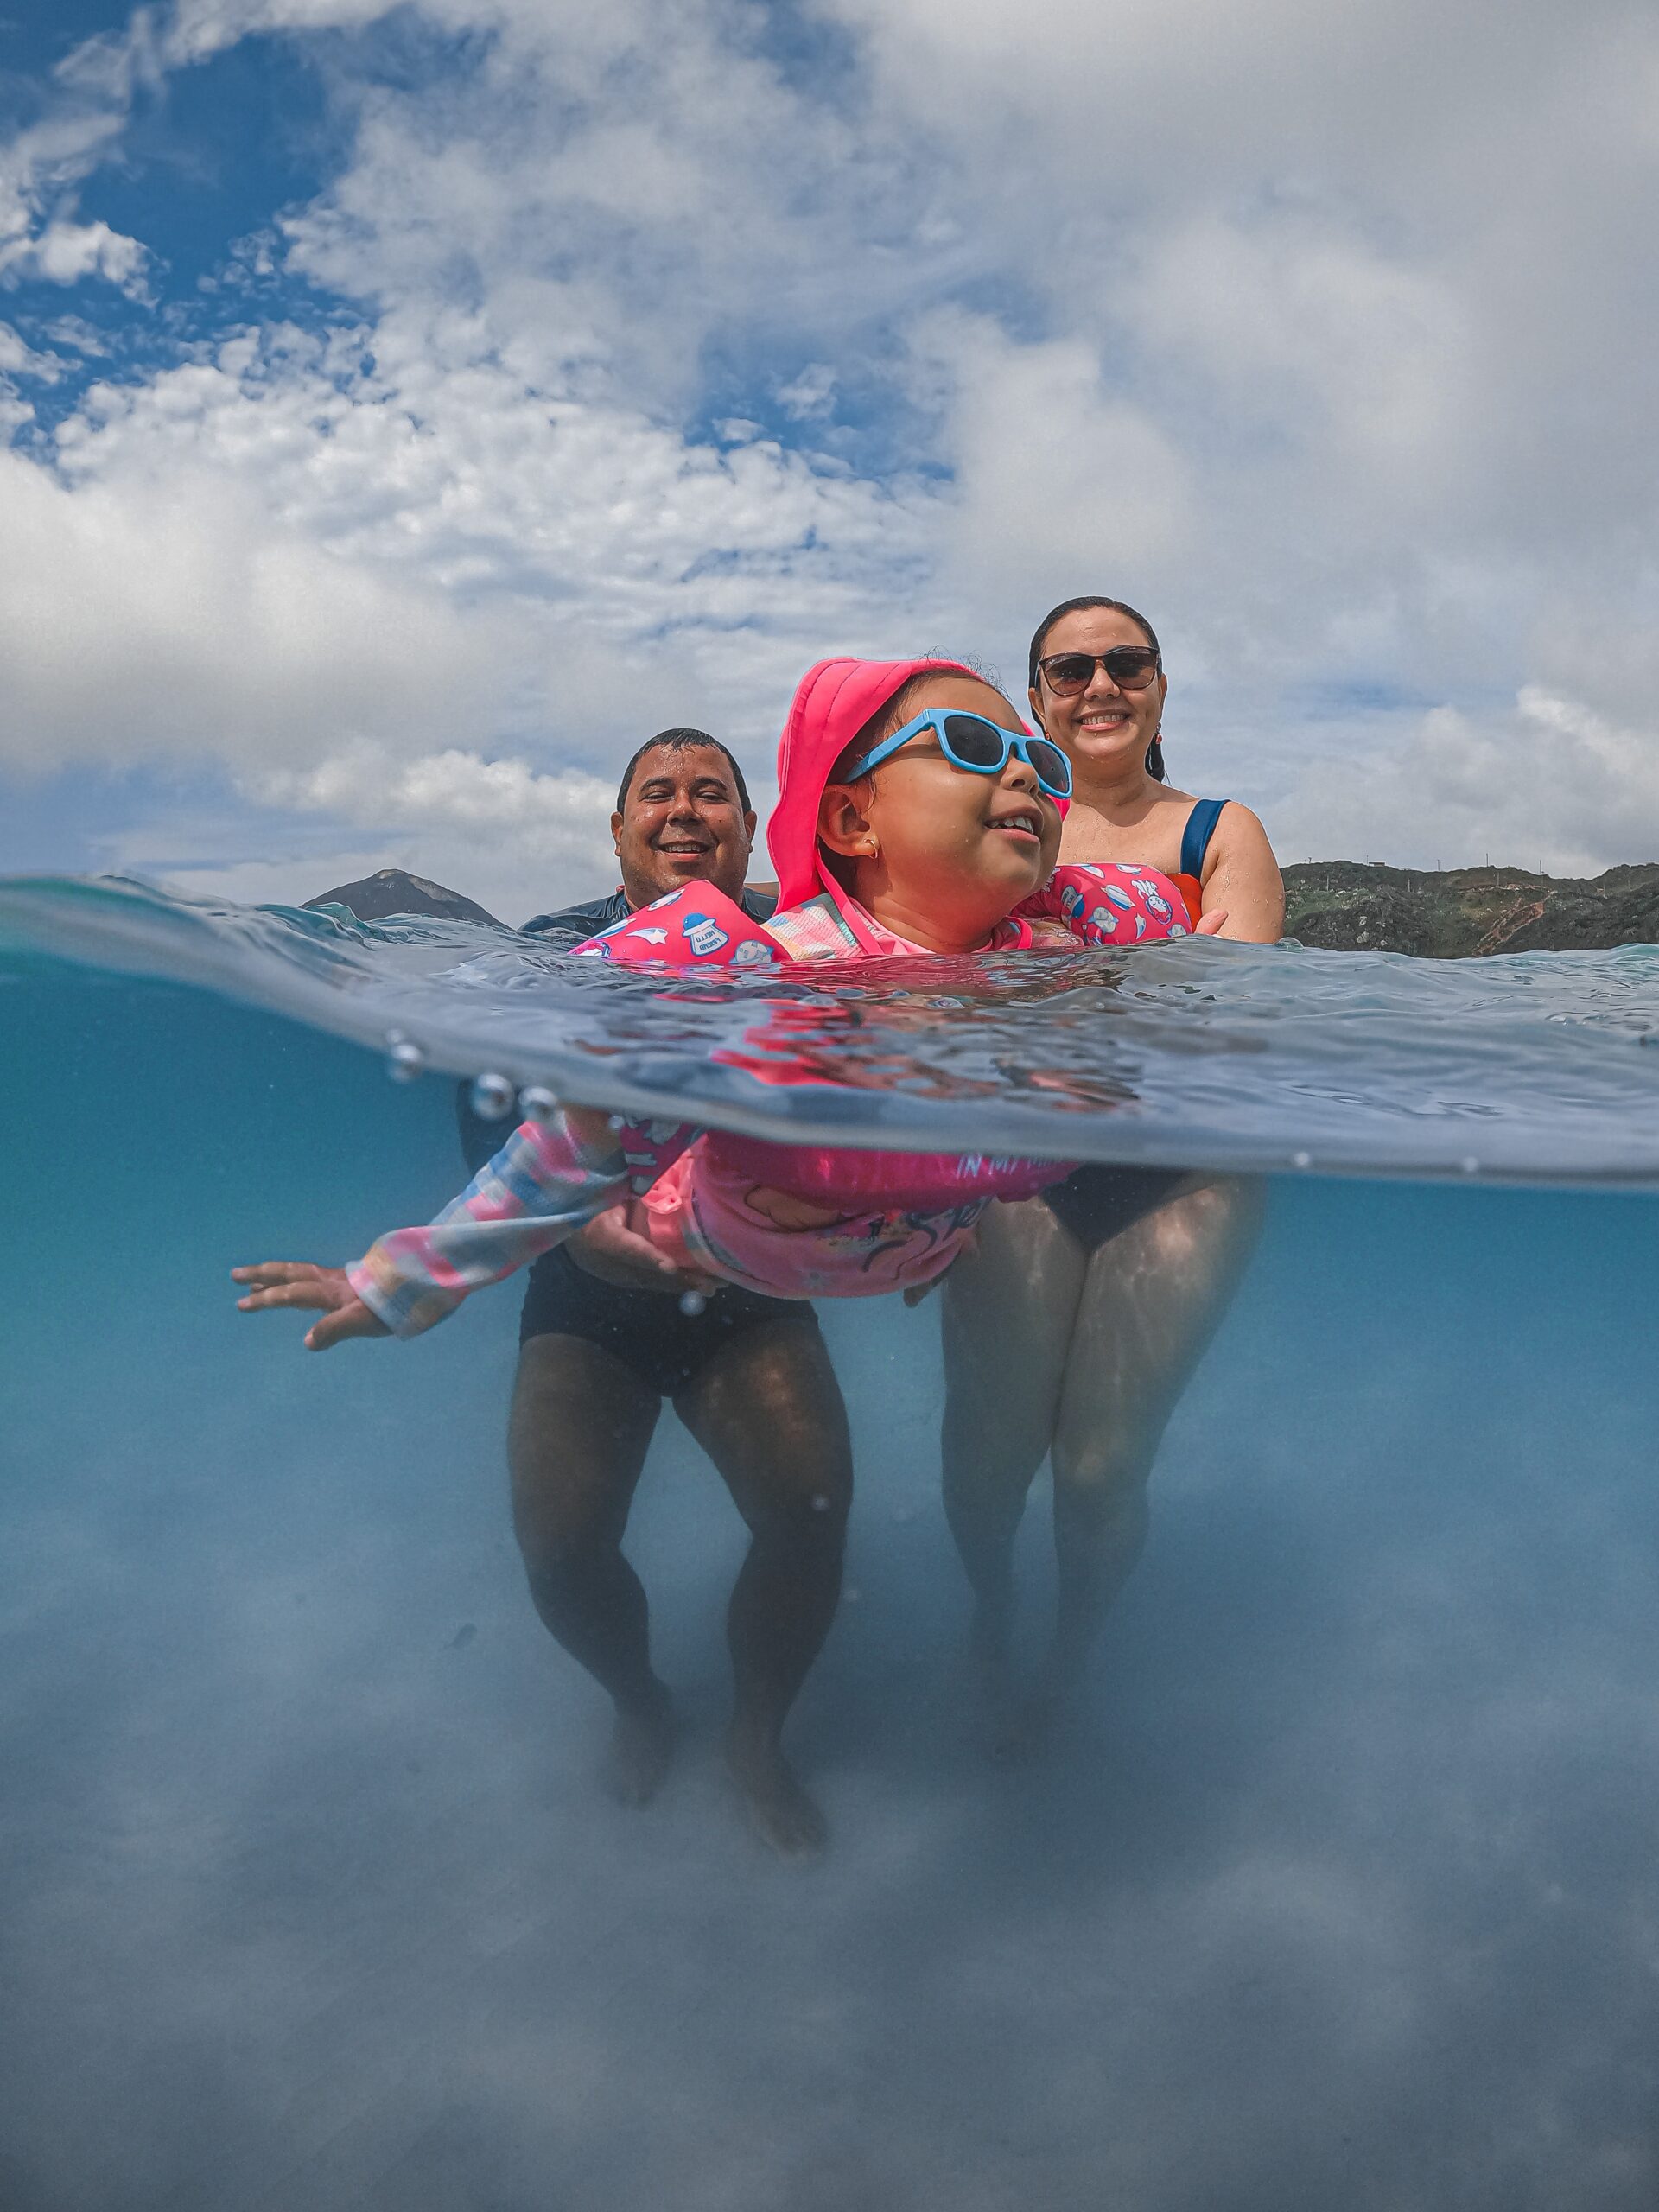 Young girl swims with her parents behind her. Camera is half in the water.